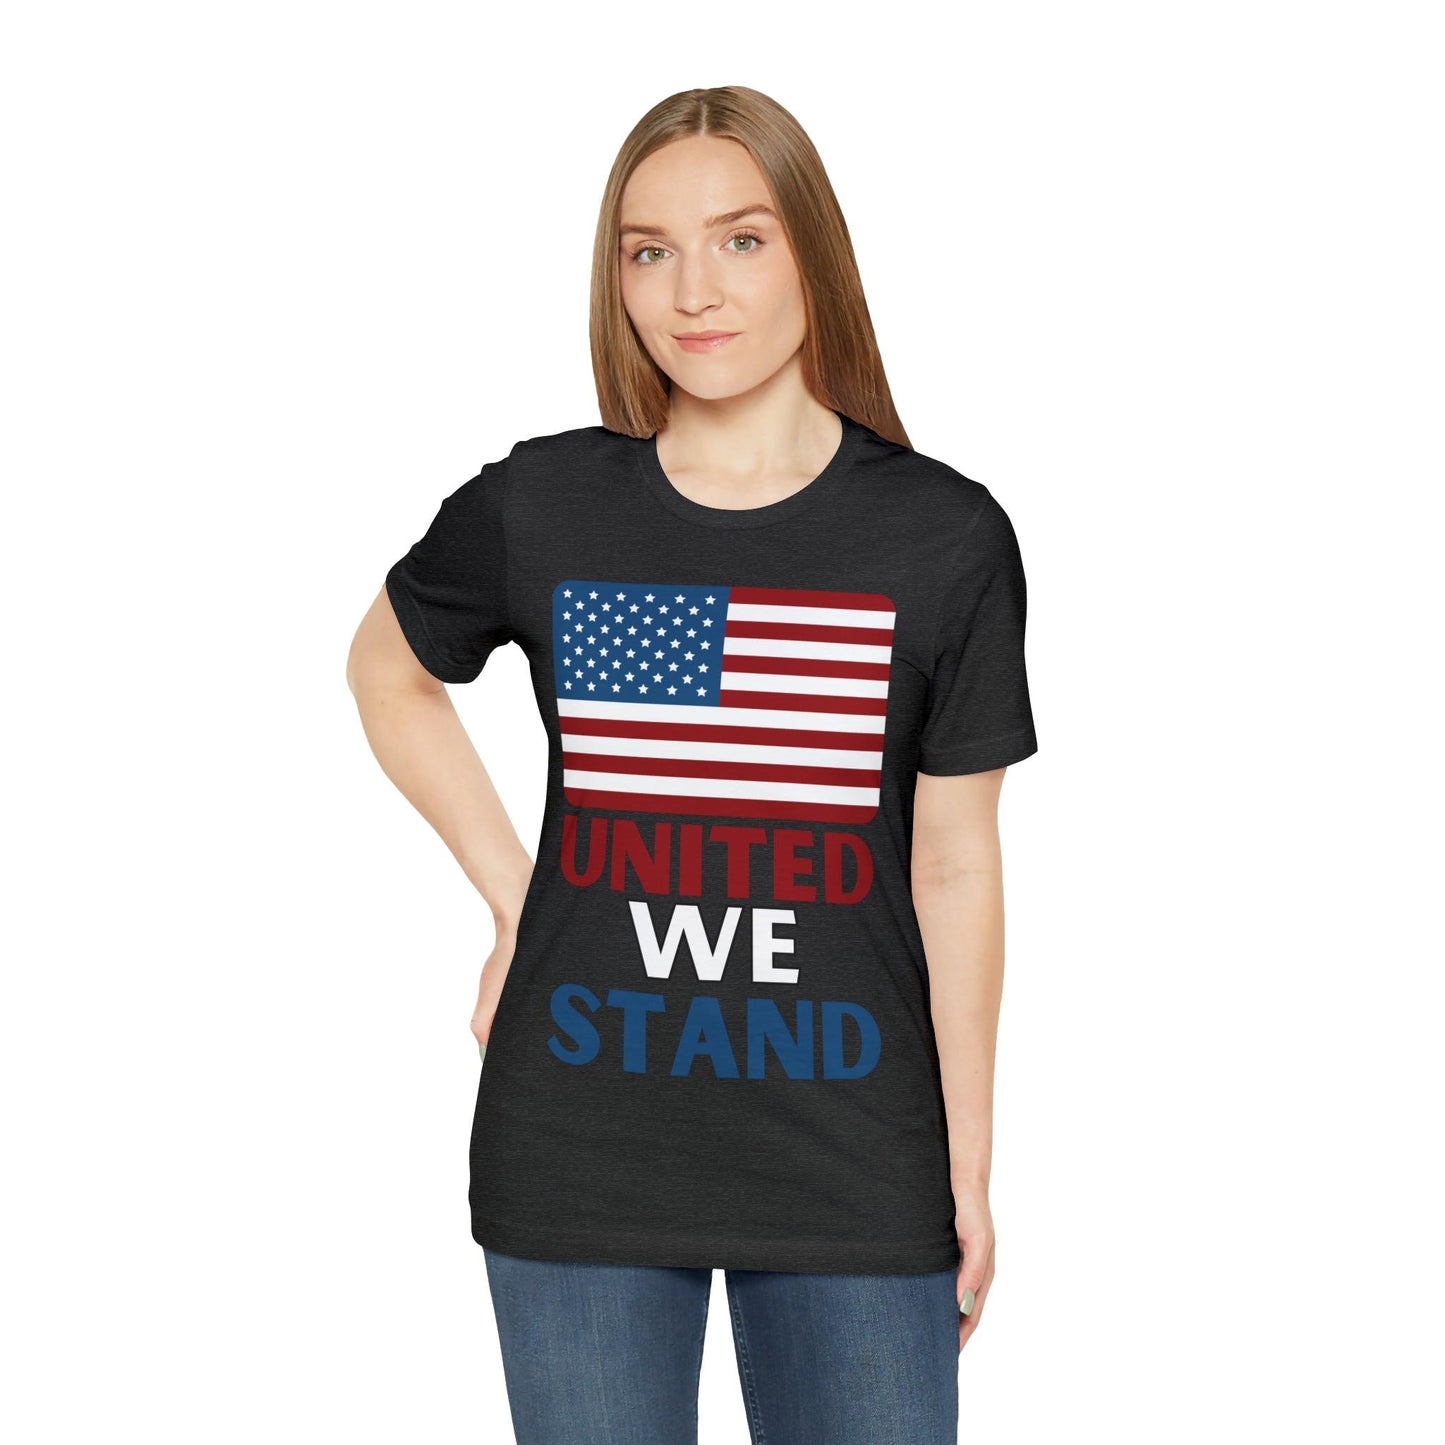 United We Stand shirt, USA Flag shirt, 4th of July shirt, Independence Day